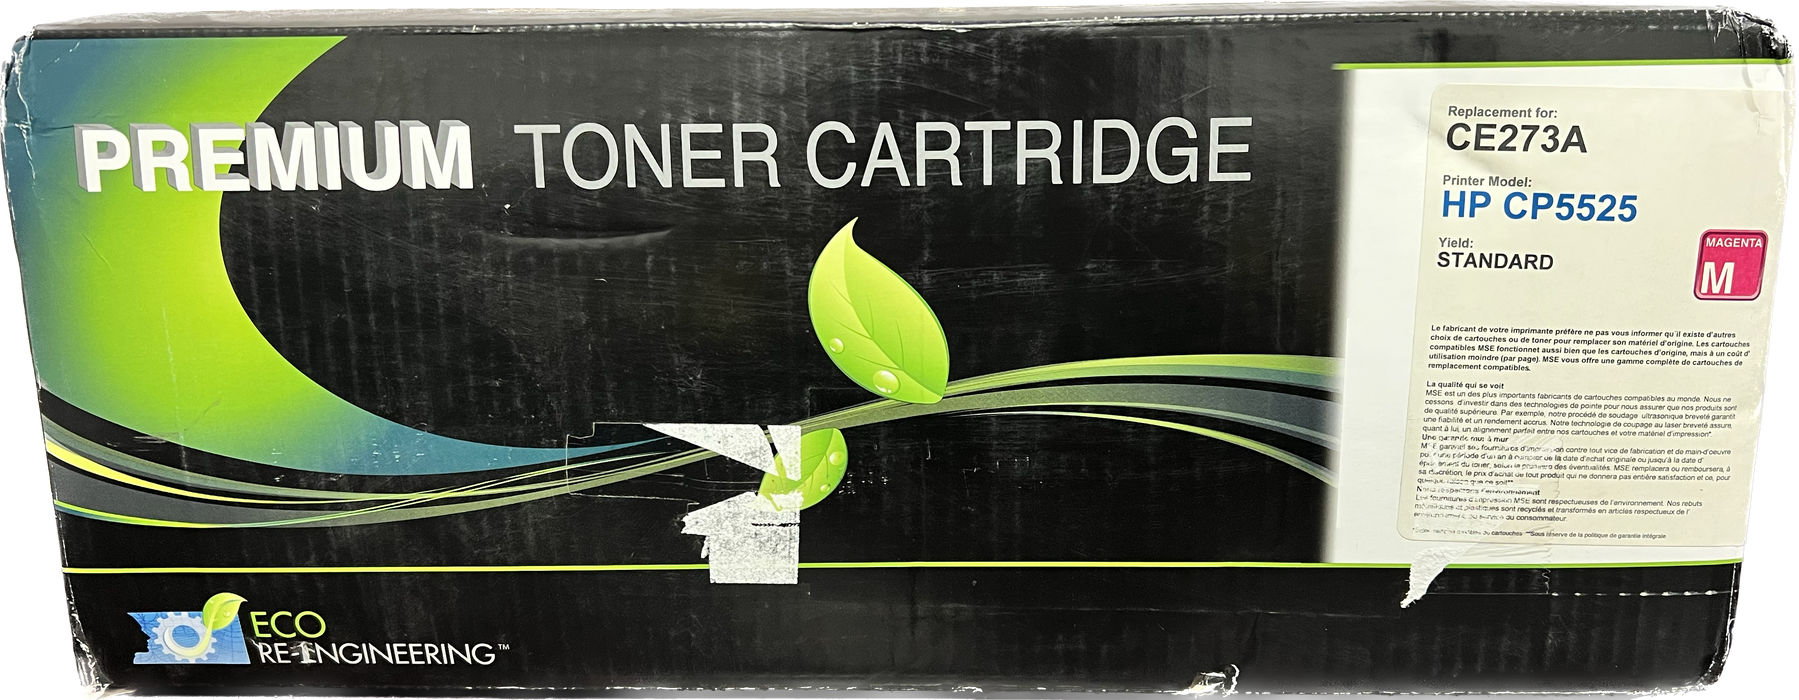 Compatible HP Magenta Laser Toner Cartridge| Replace for CE273A